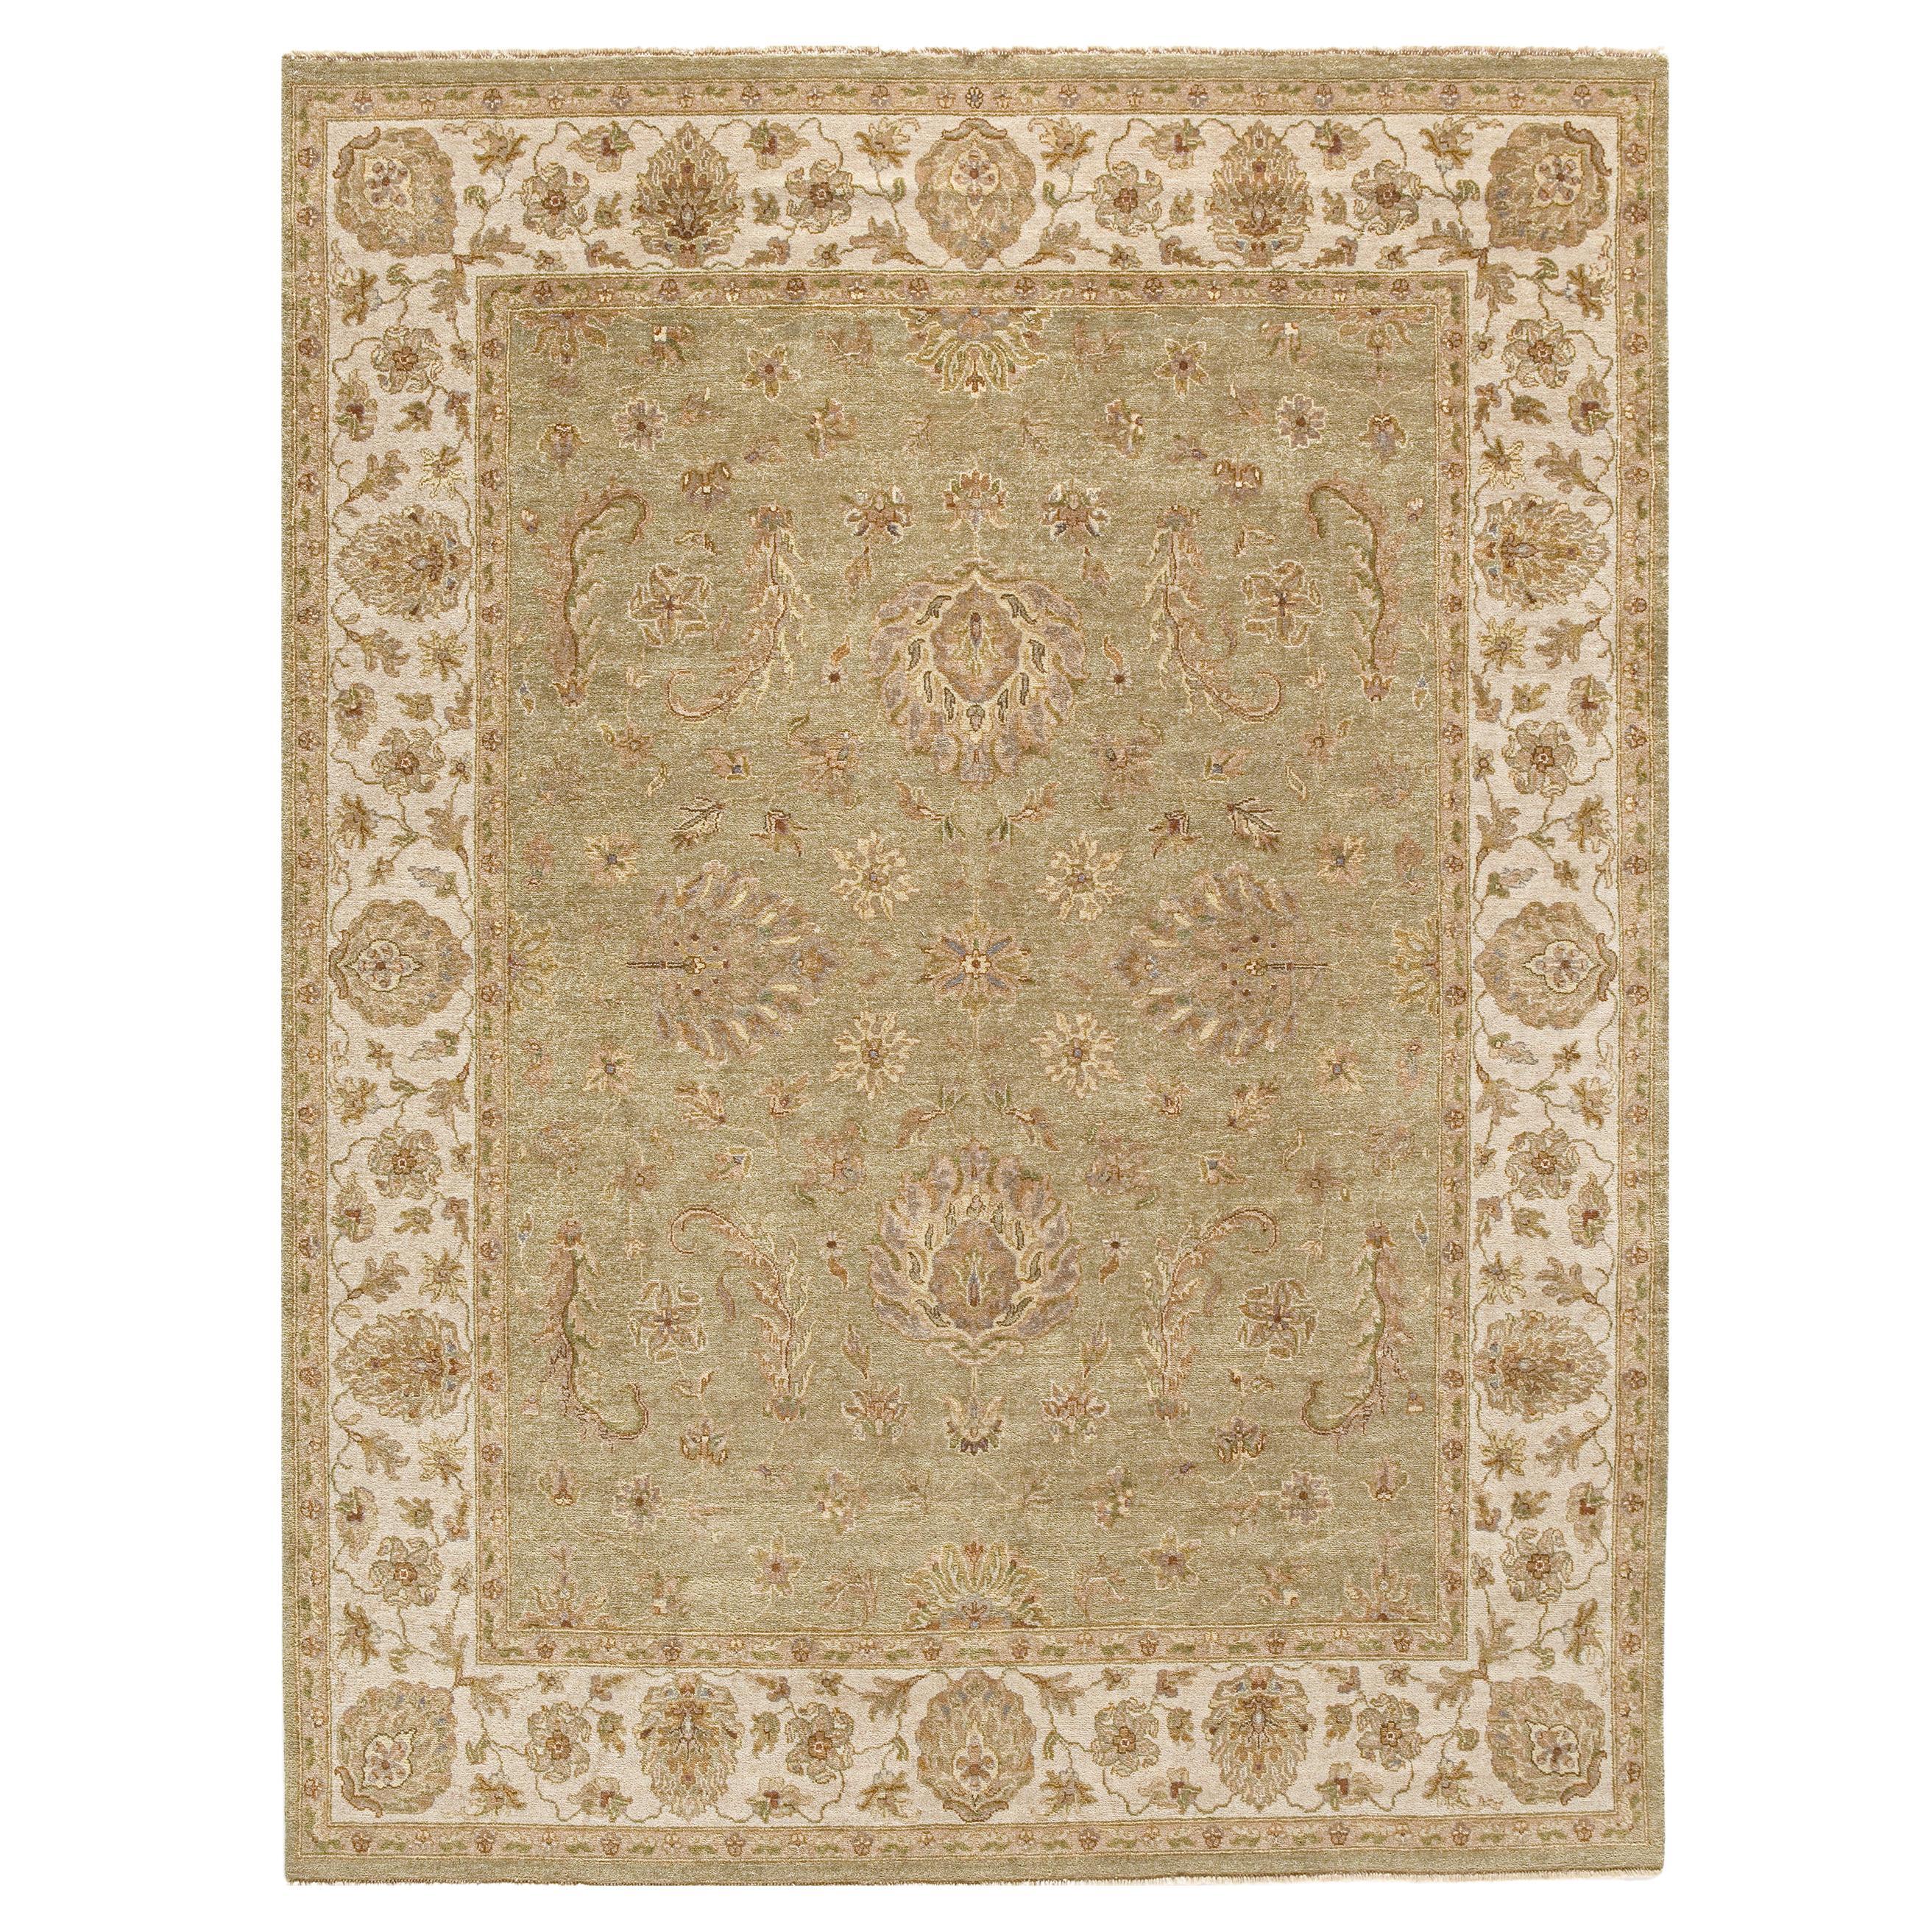 Luxury Traditional Hand-Knotted Amritsar Agra Lt. Green/Ivory 12x15 Rug